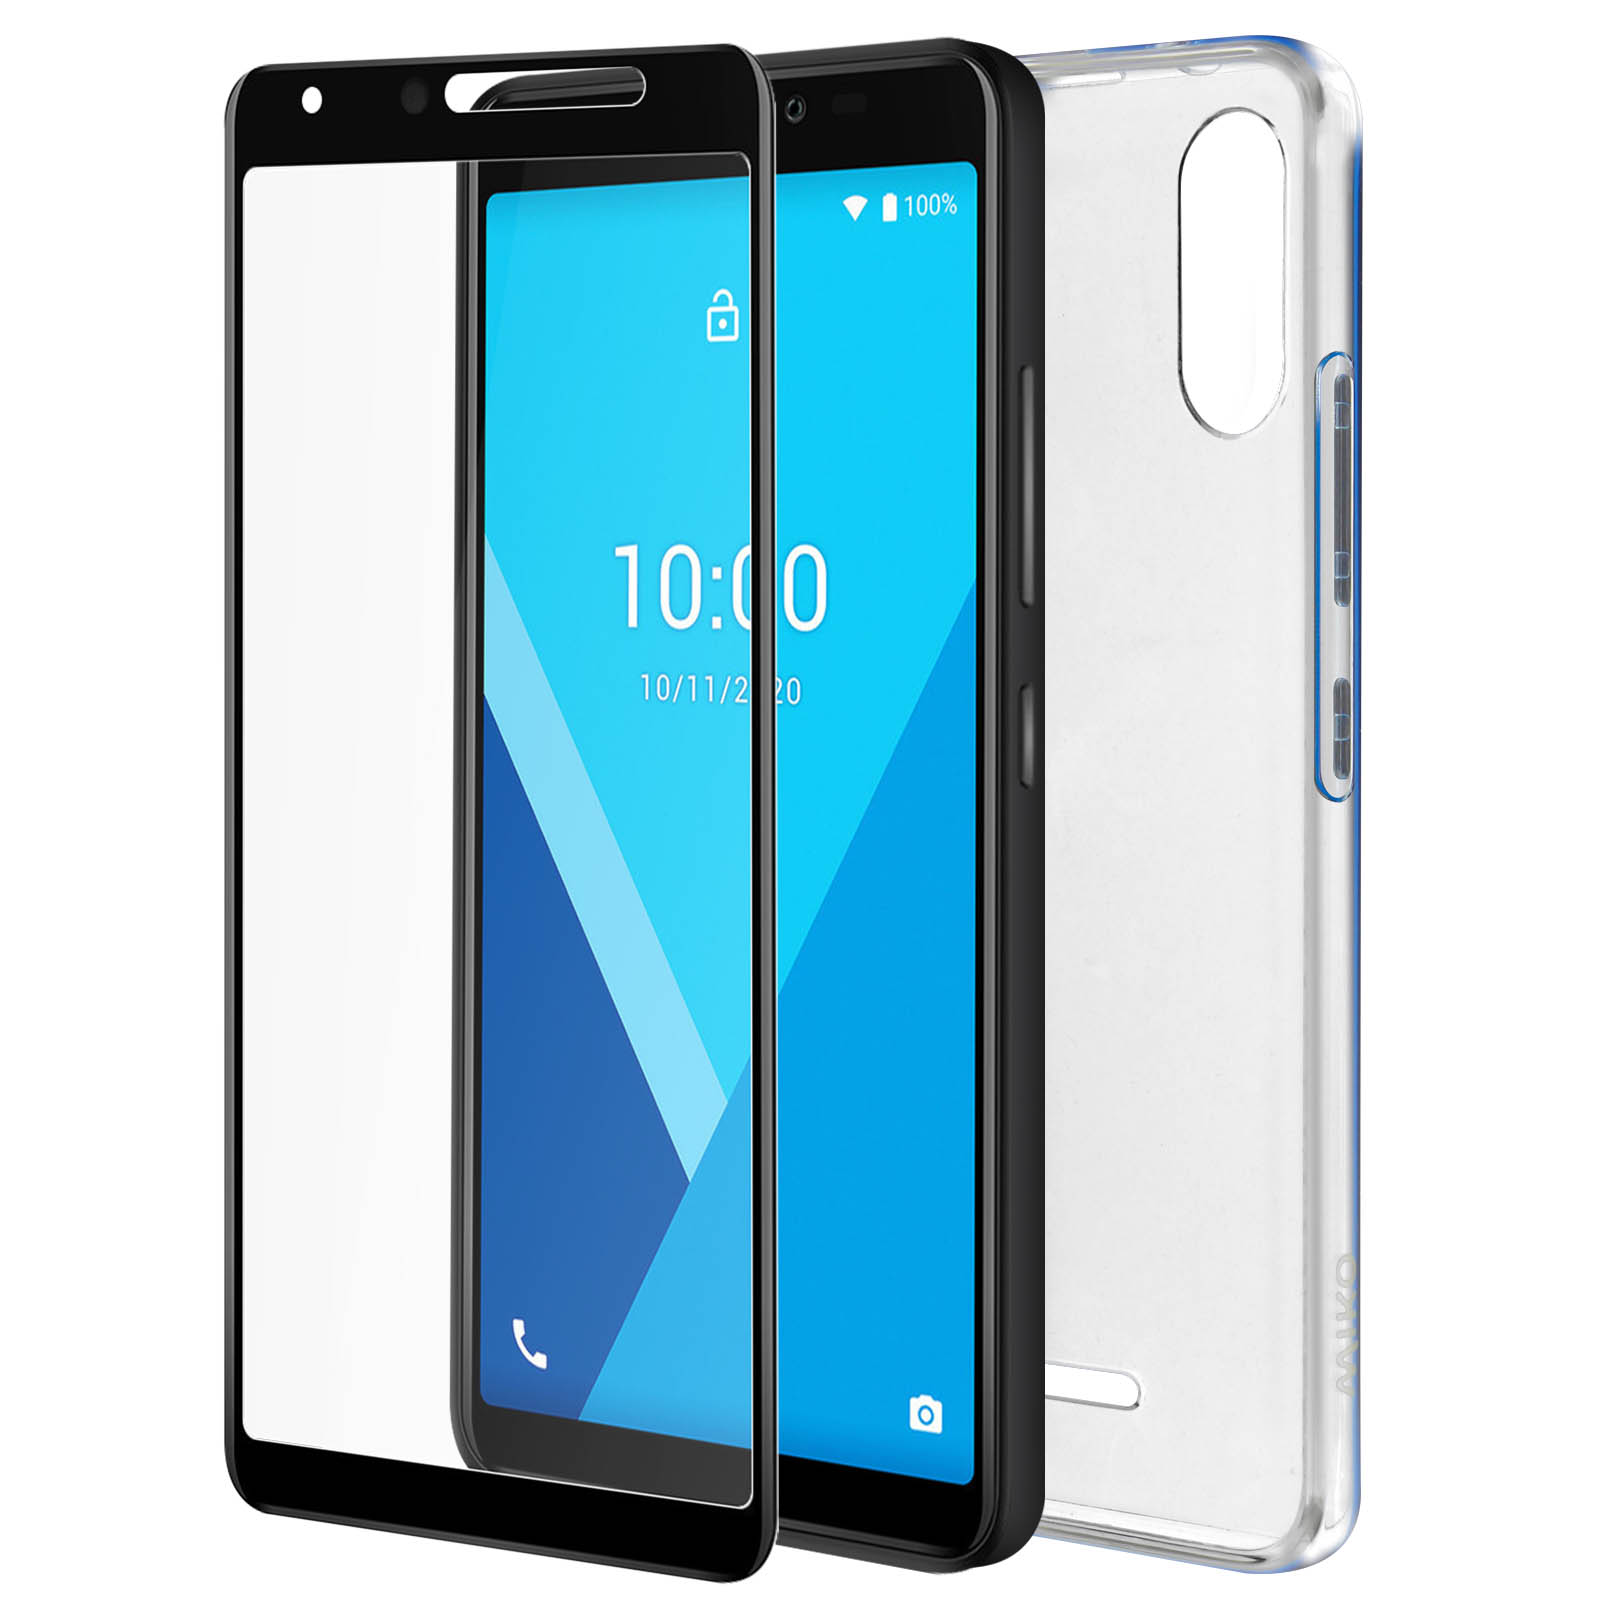 WIKO Parfait Backcover, Wiko, Y51, Transparent Series, Wiko